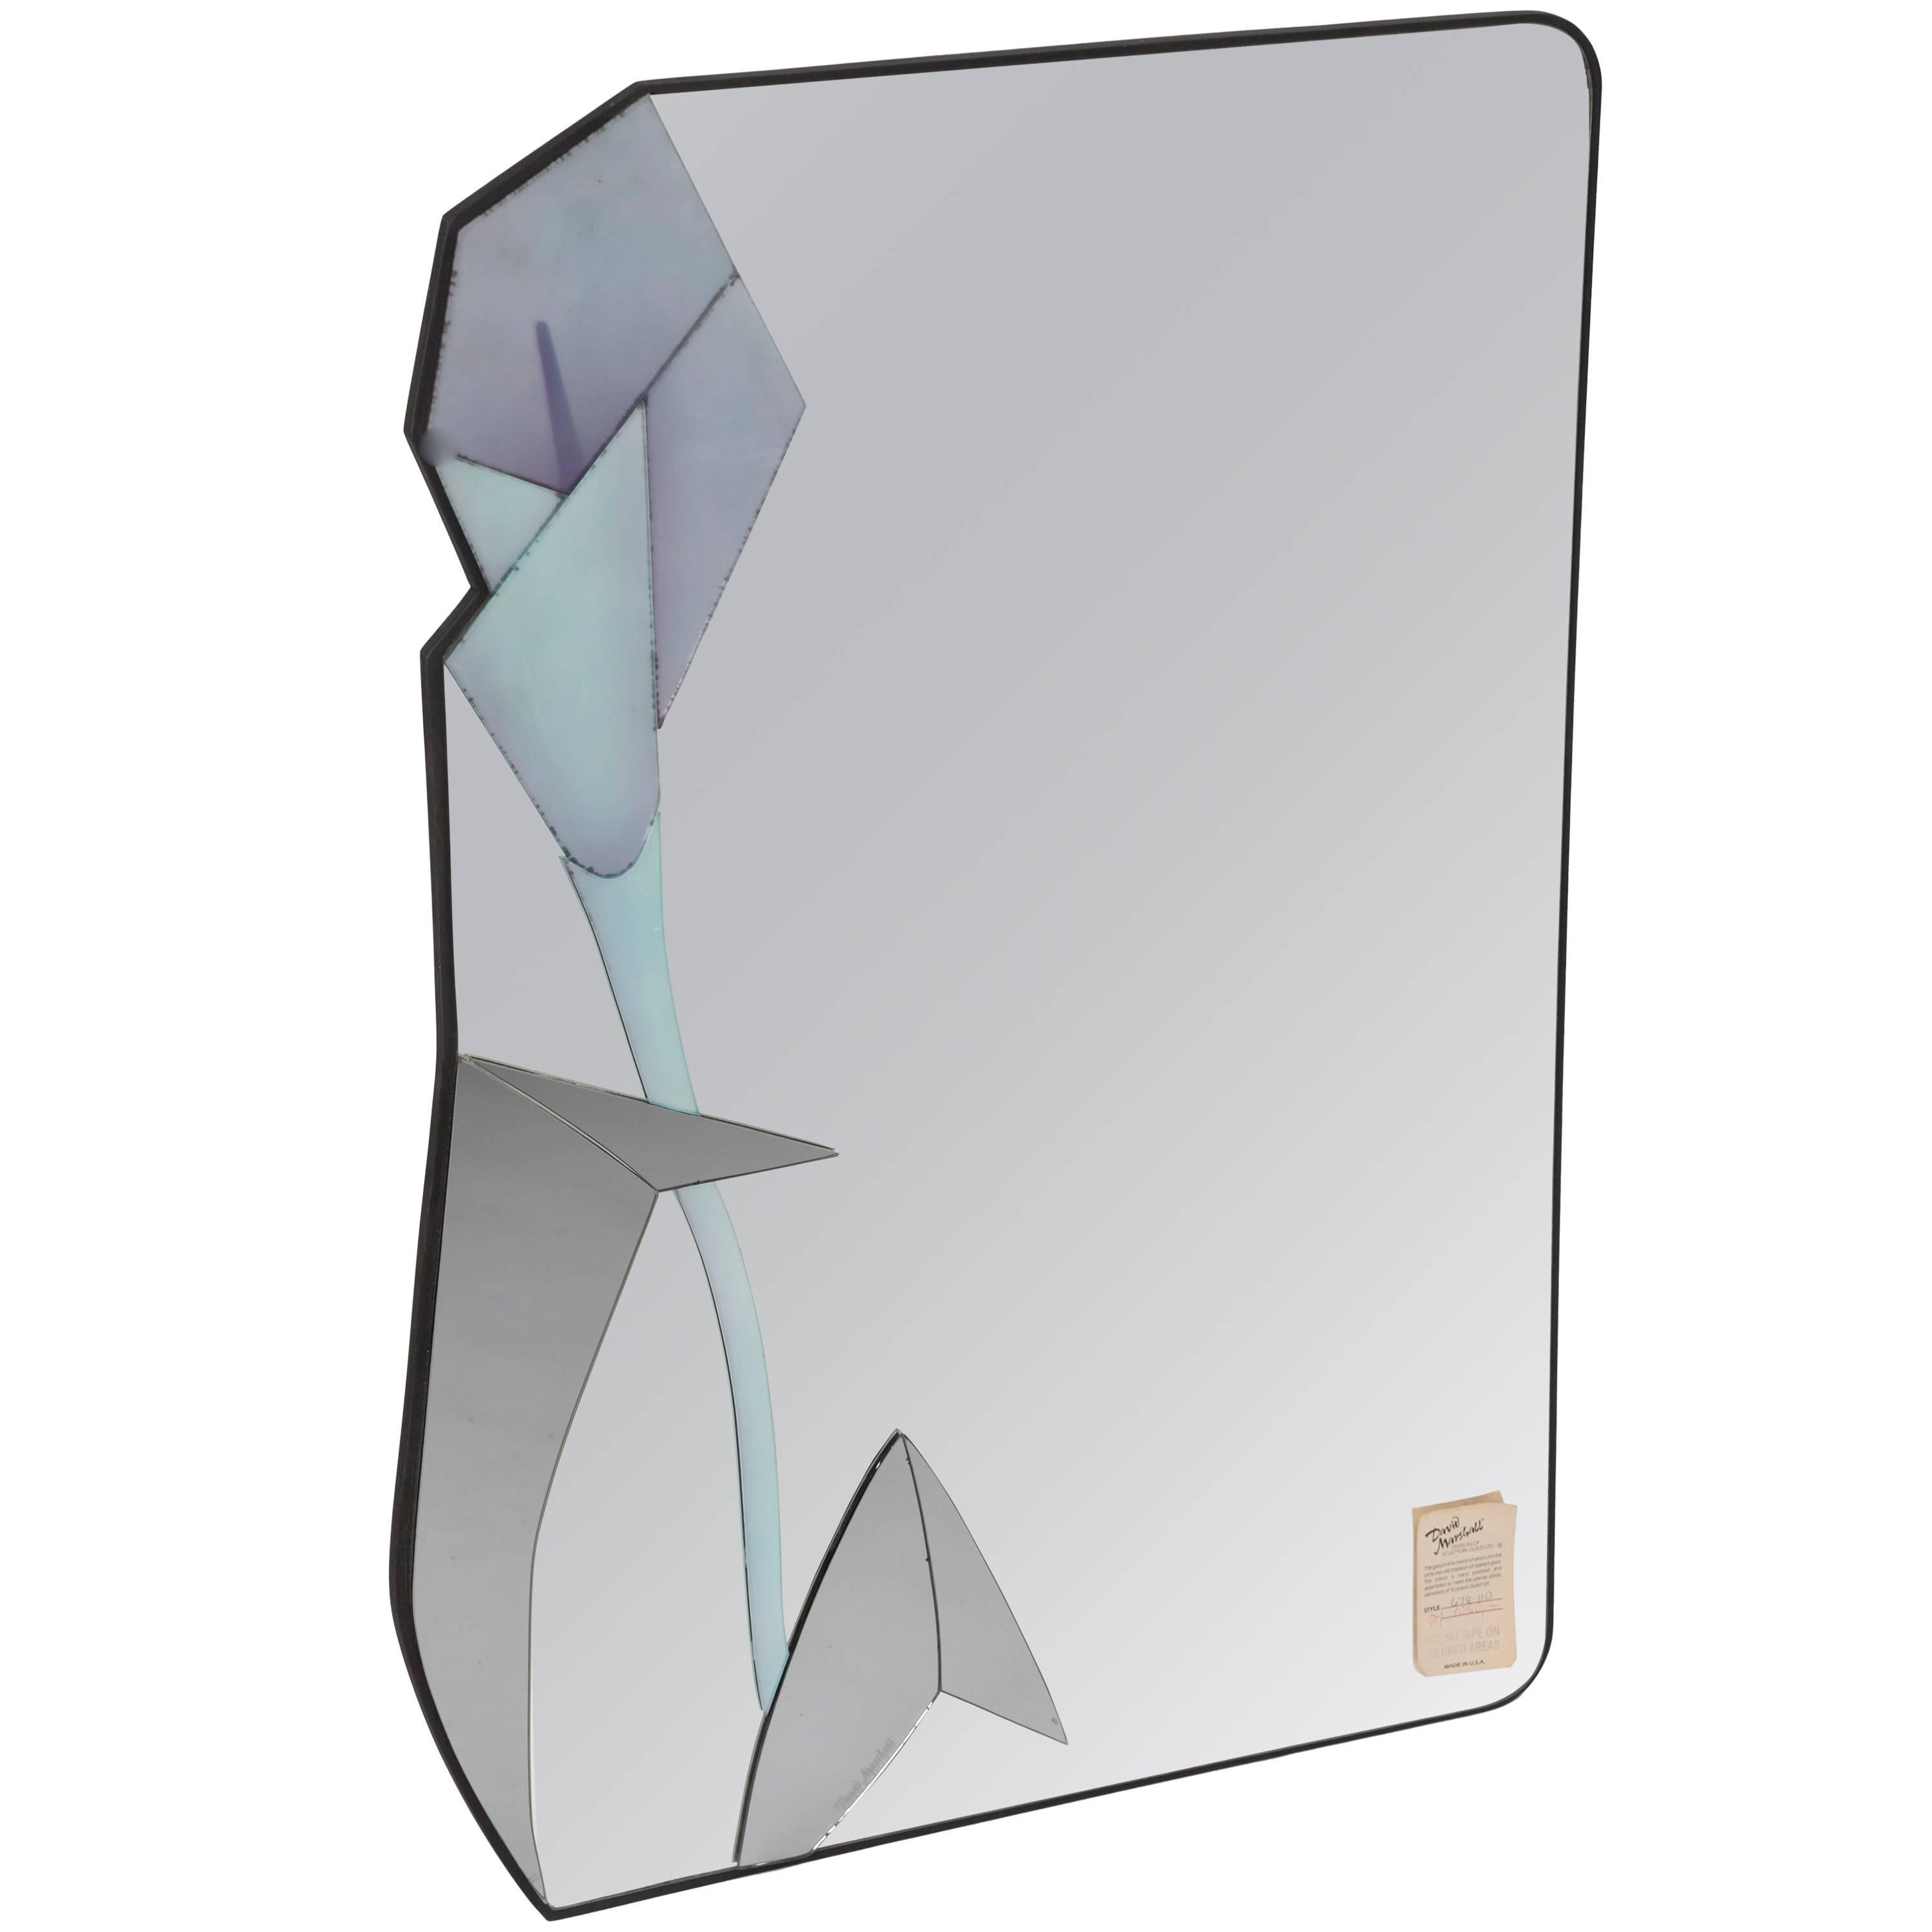 Asymmetric Wall Mirror with several different layers created by David Marshall 